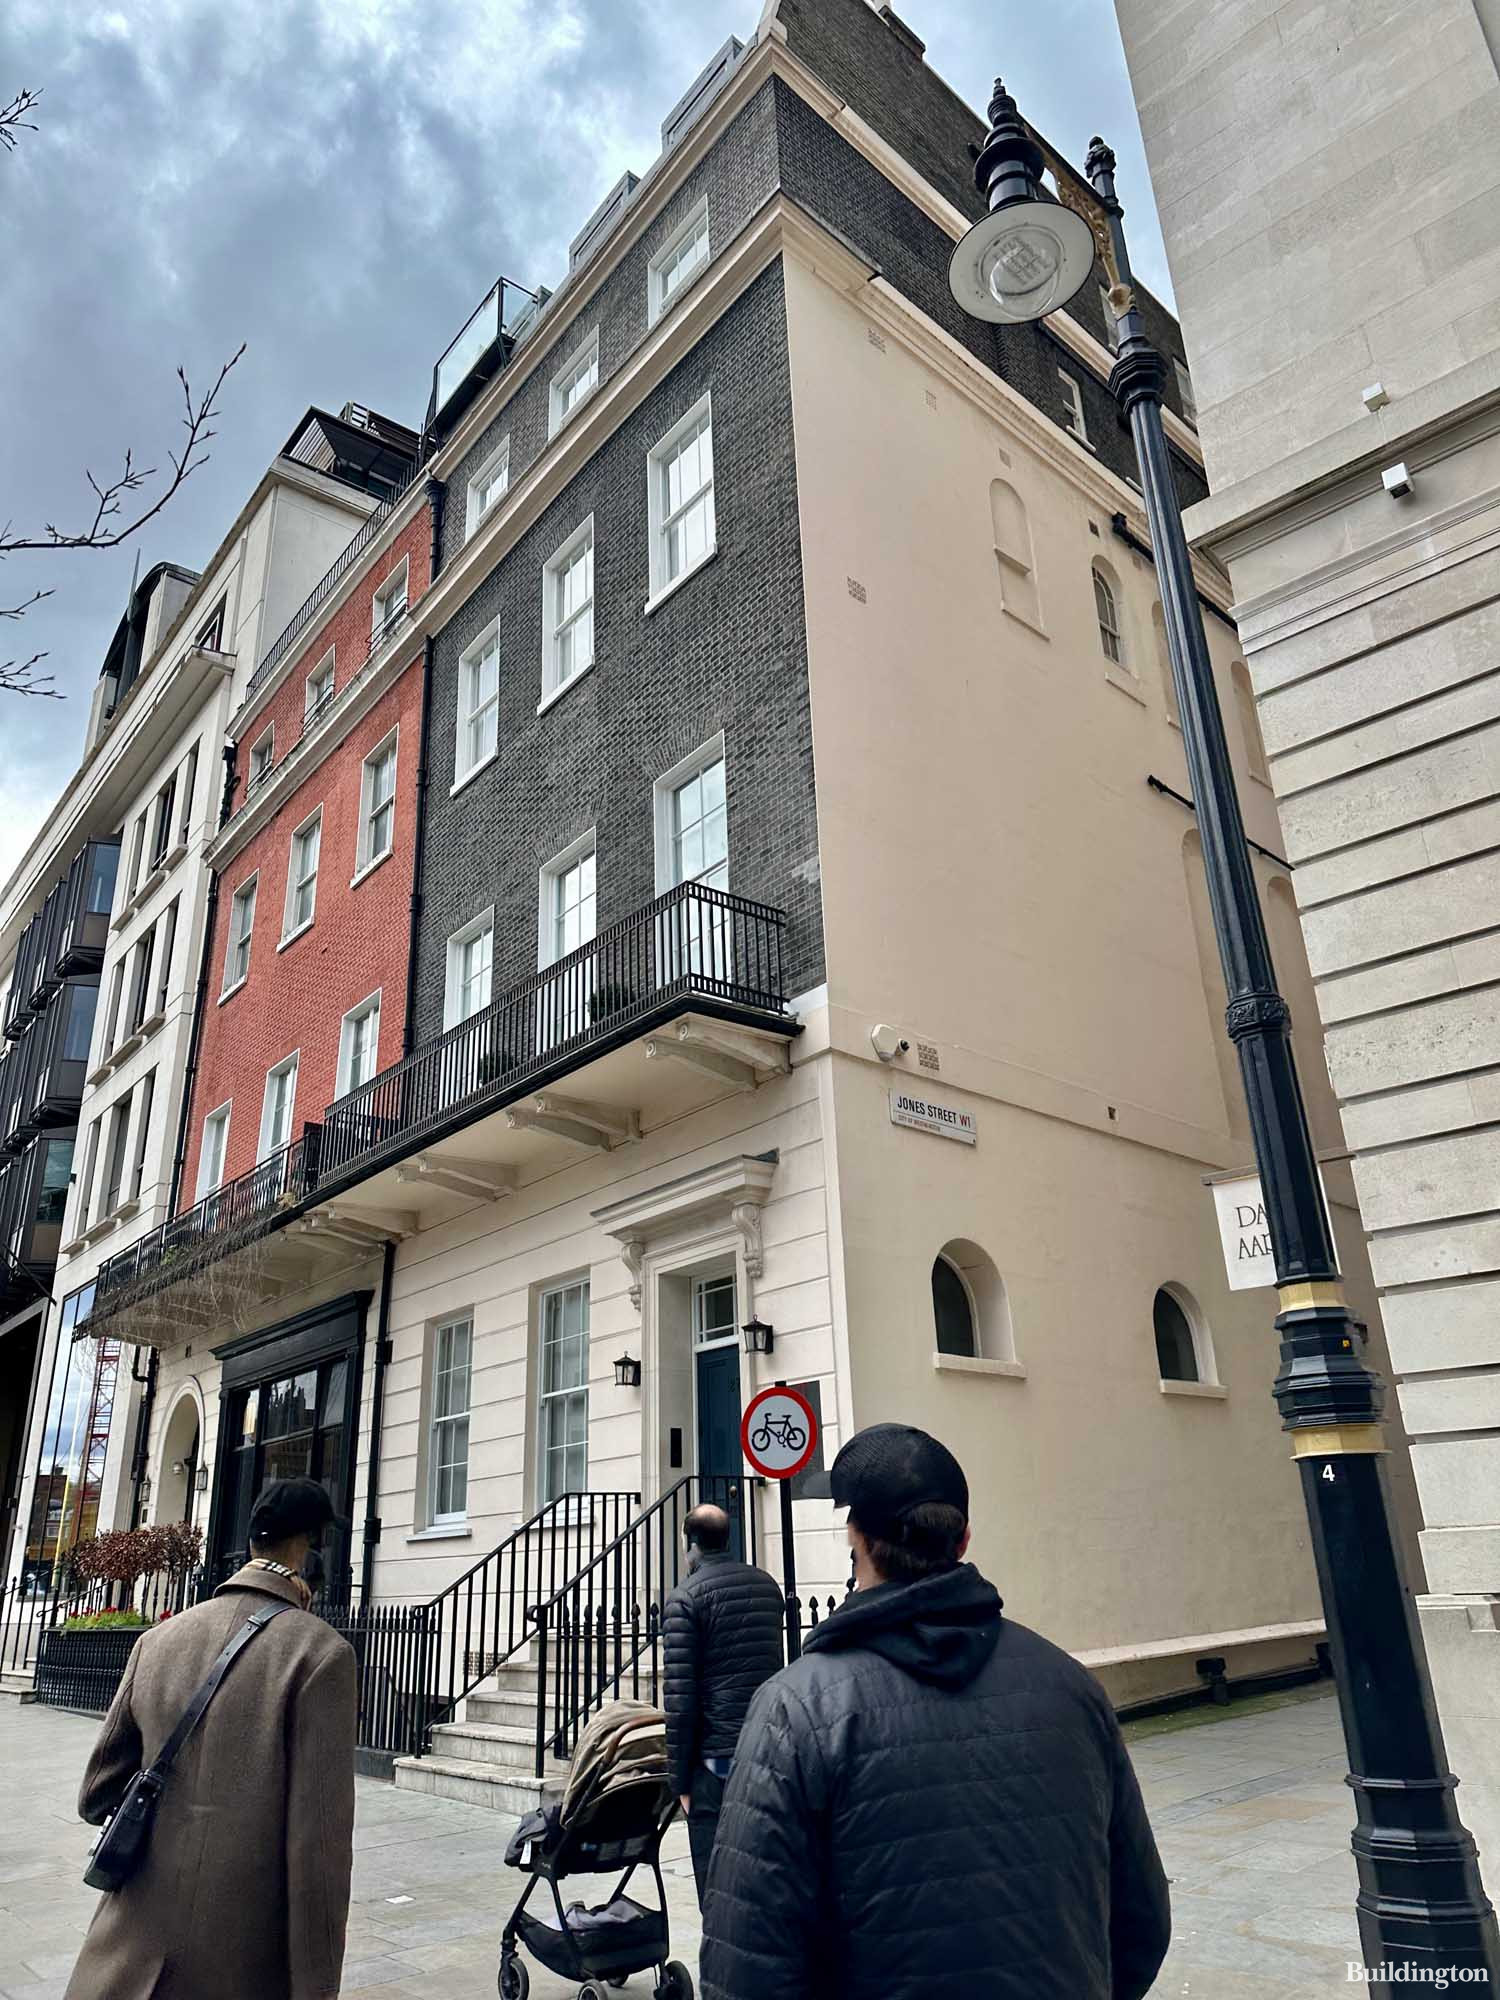 Exterior of 27 Berkeley Square building next to No. 25 (right) and No. 28 (left) in Mayfair, London W1.